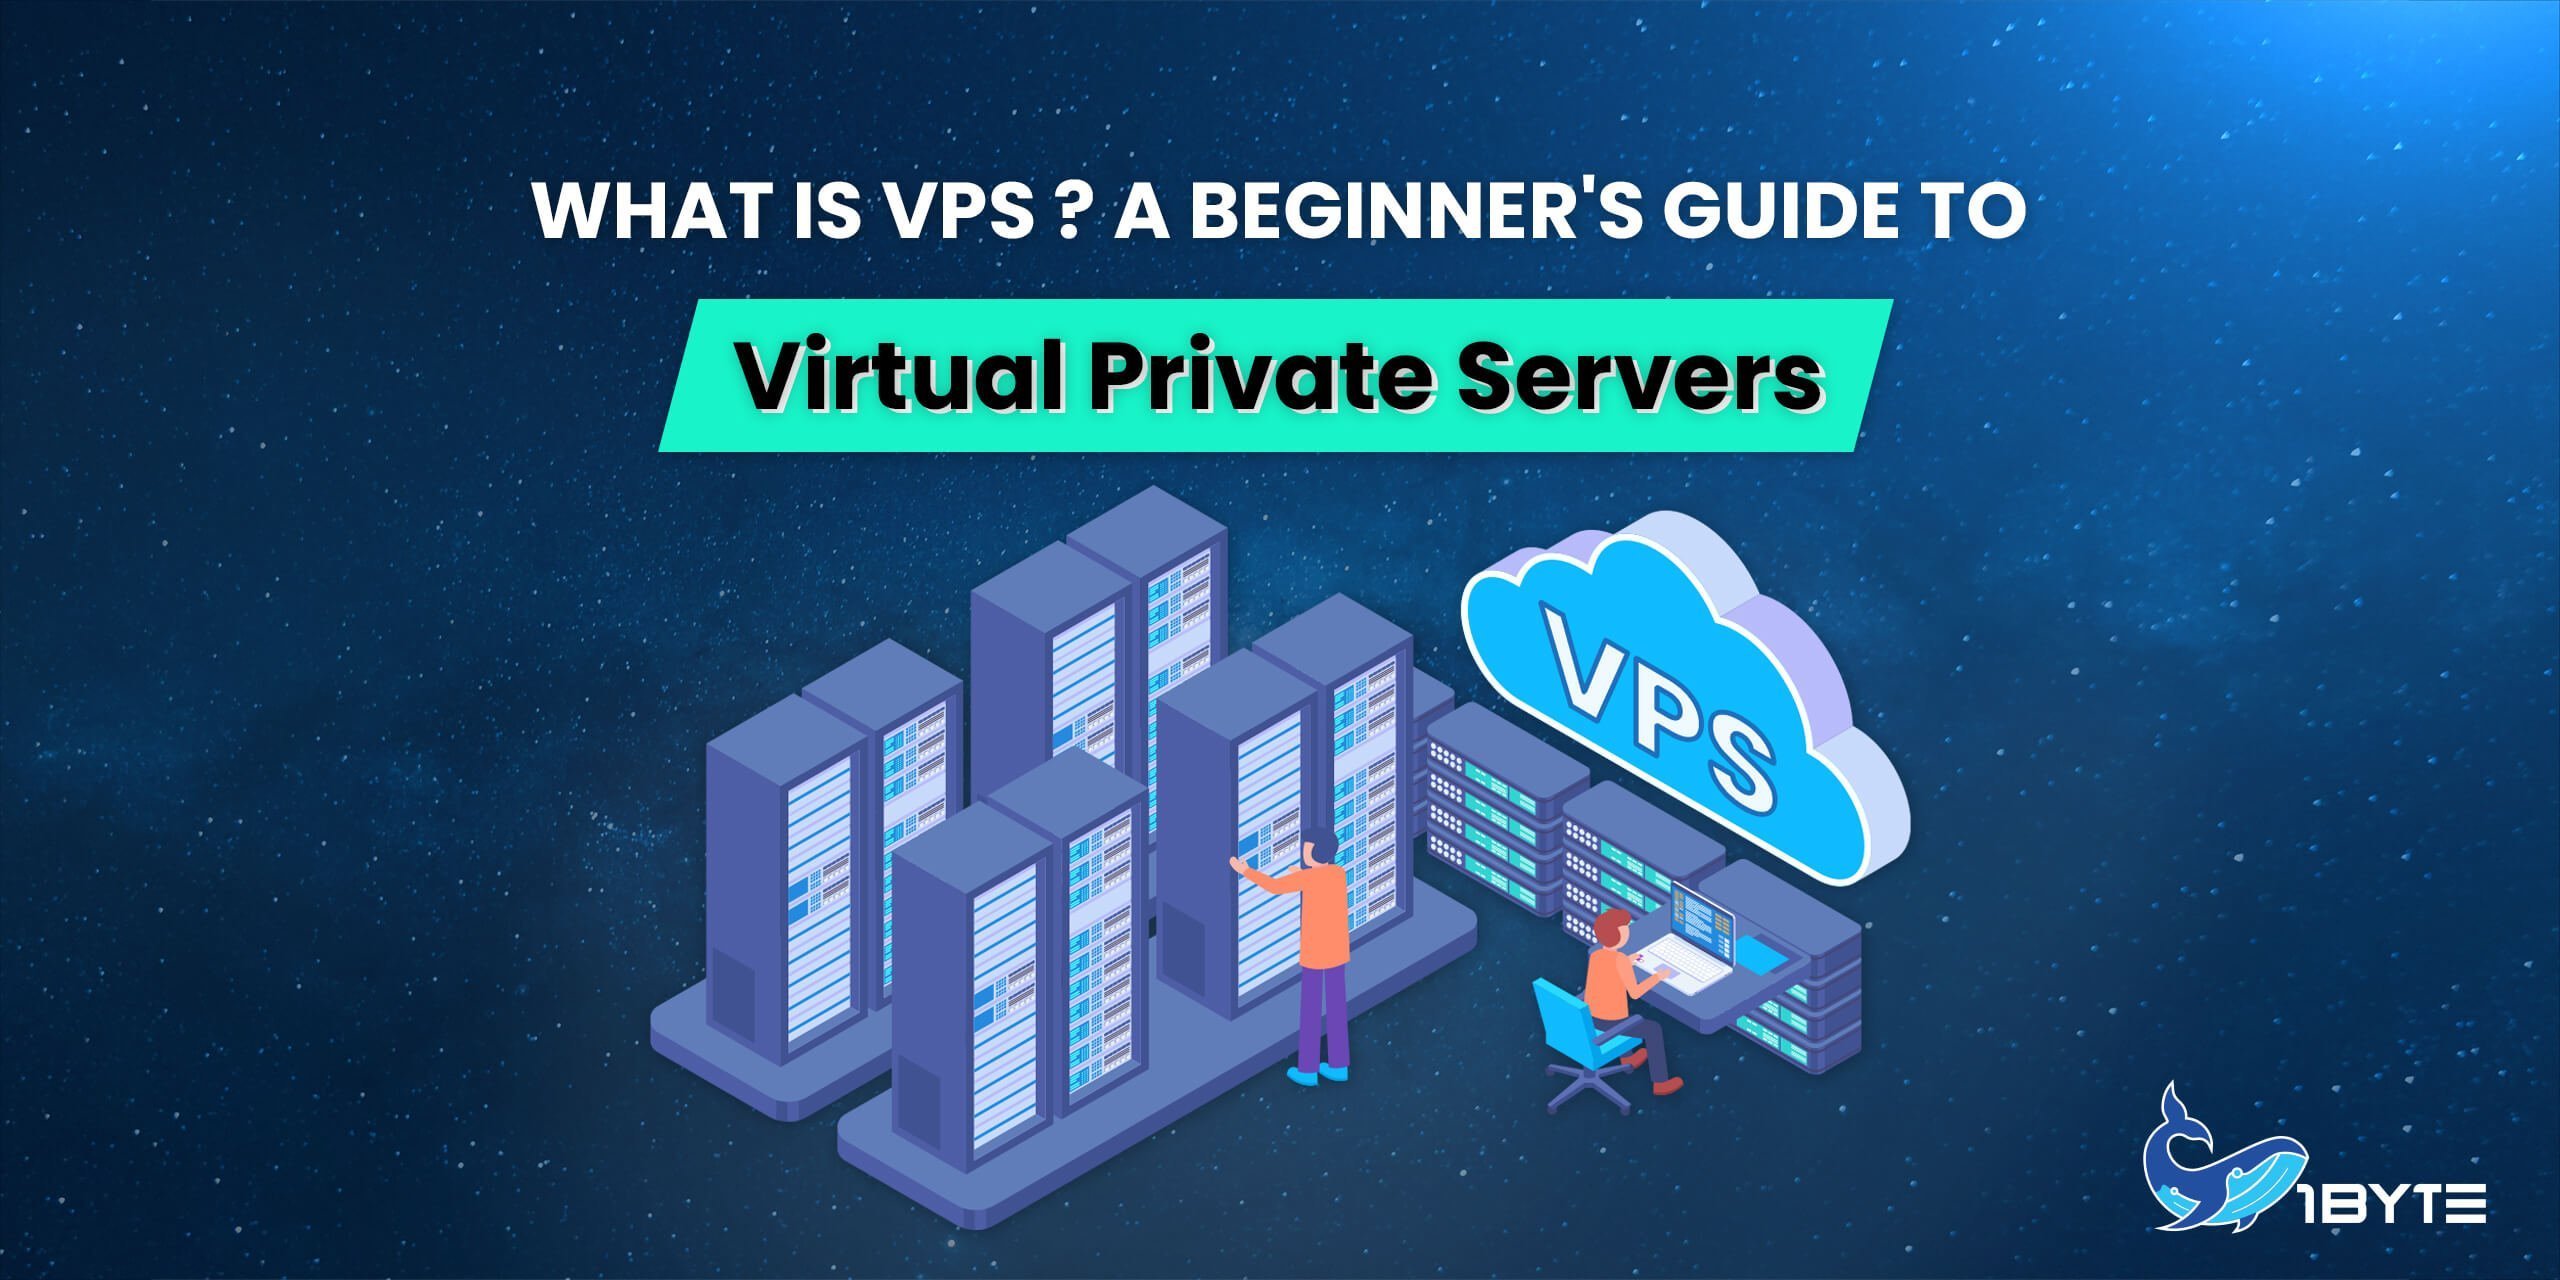 What Is VPS? A Beginner's Guide to Virtual Private Servers